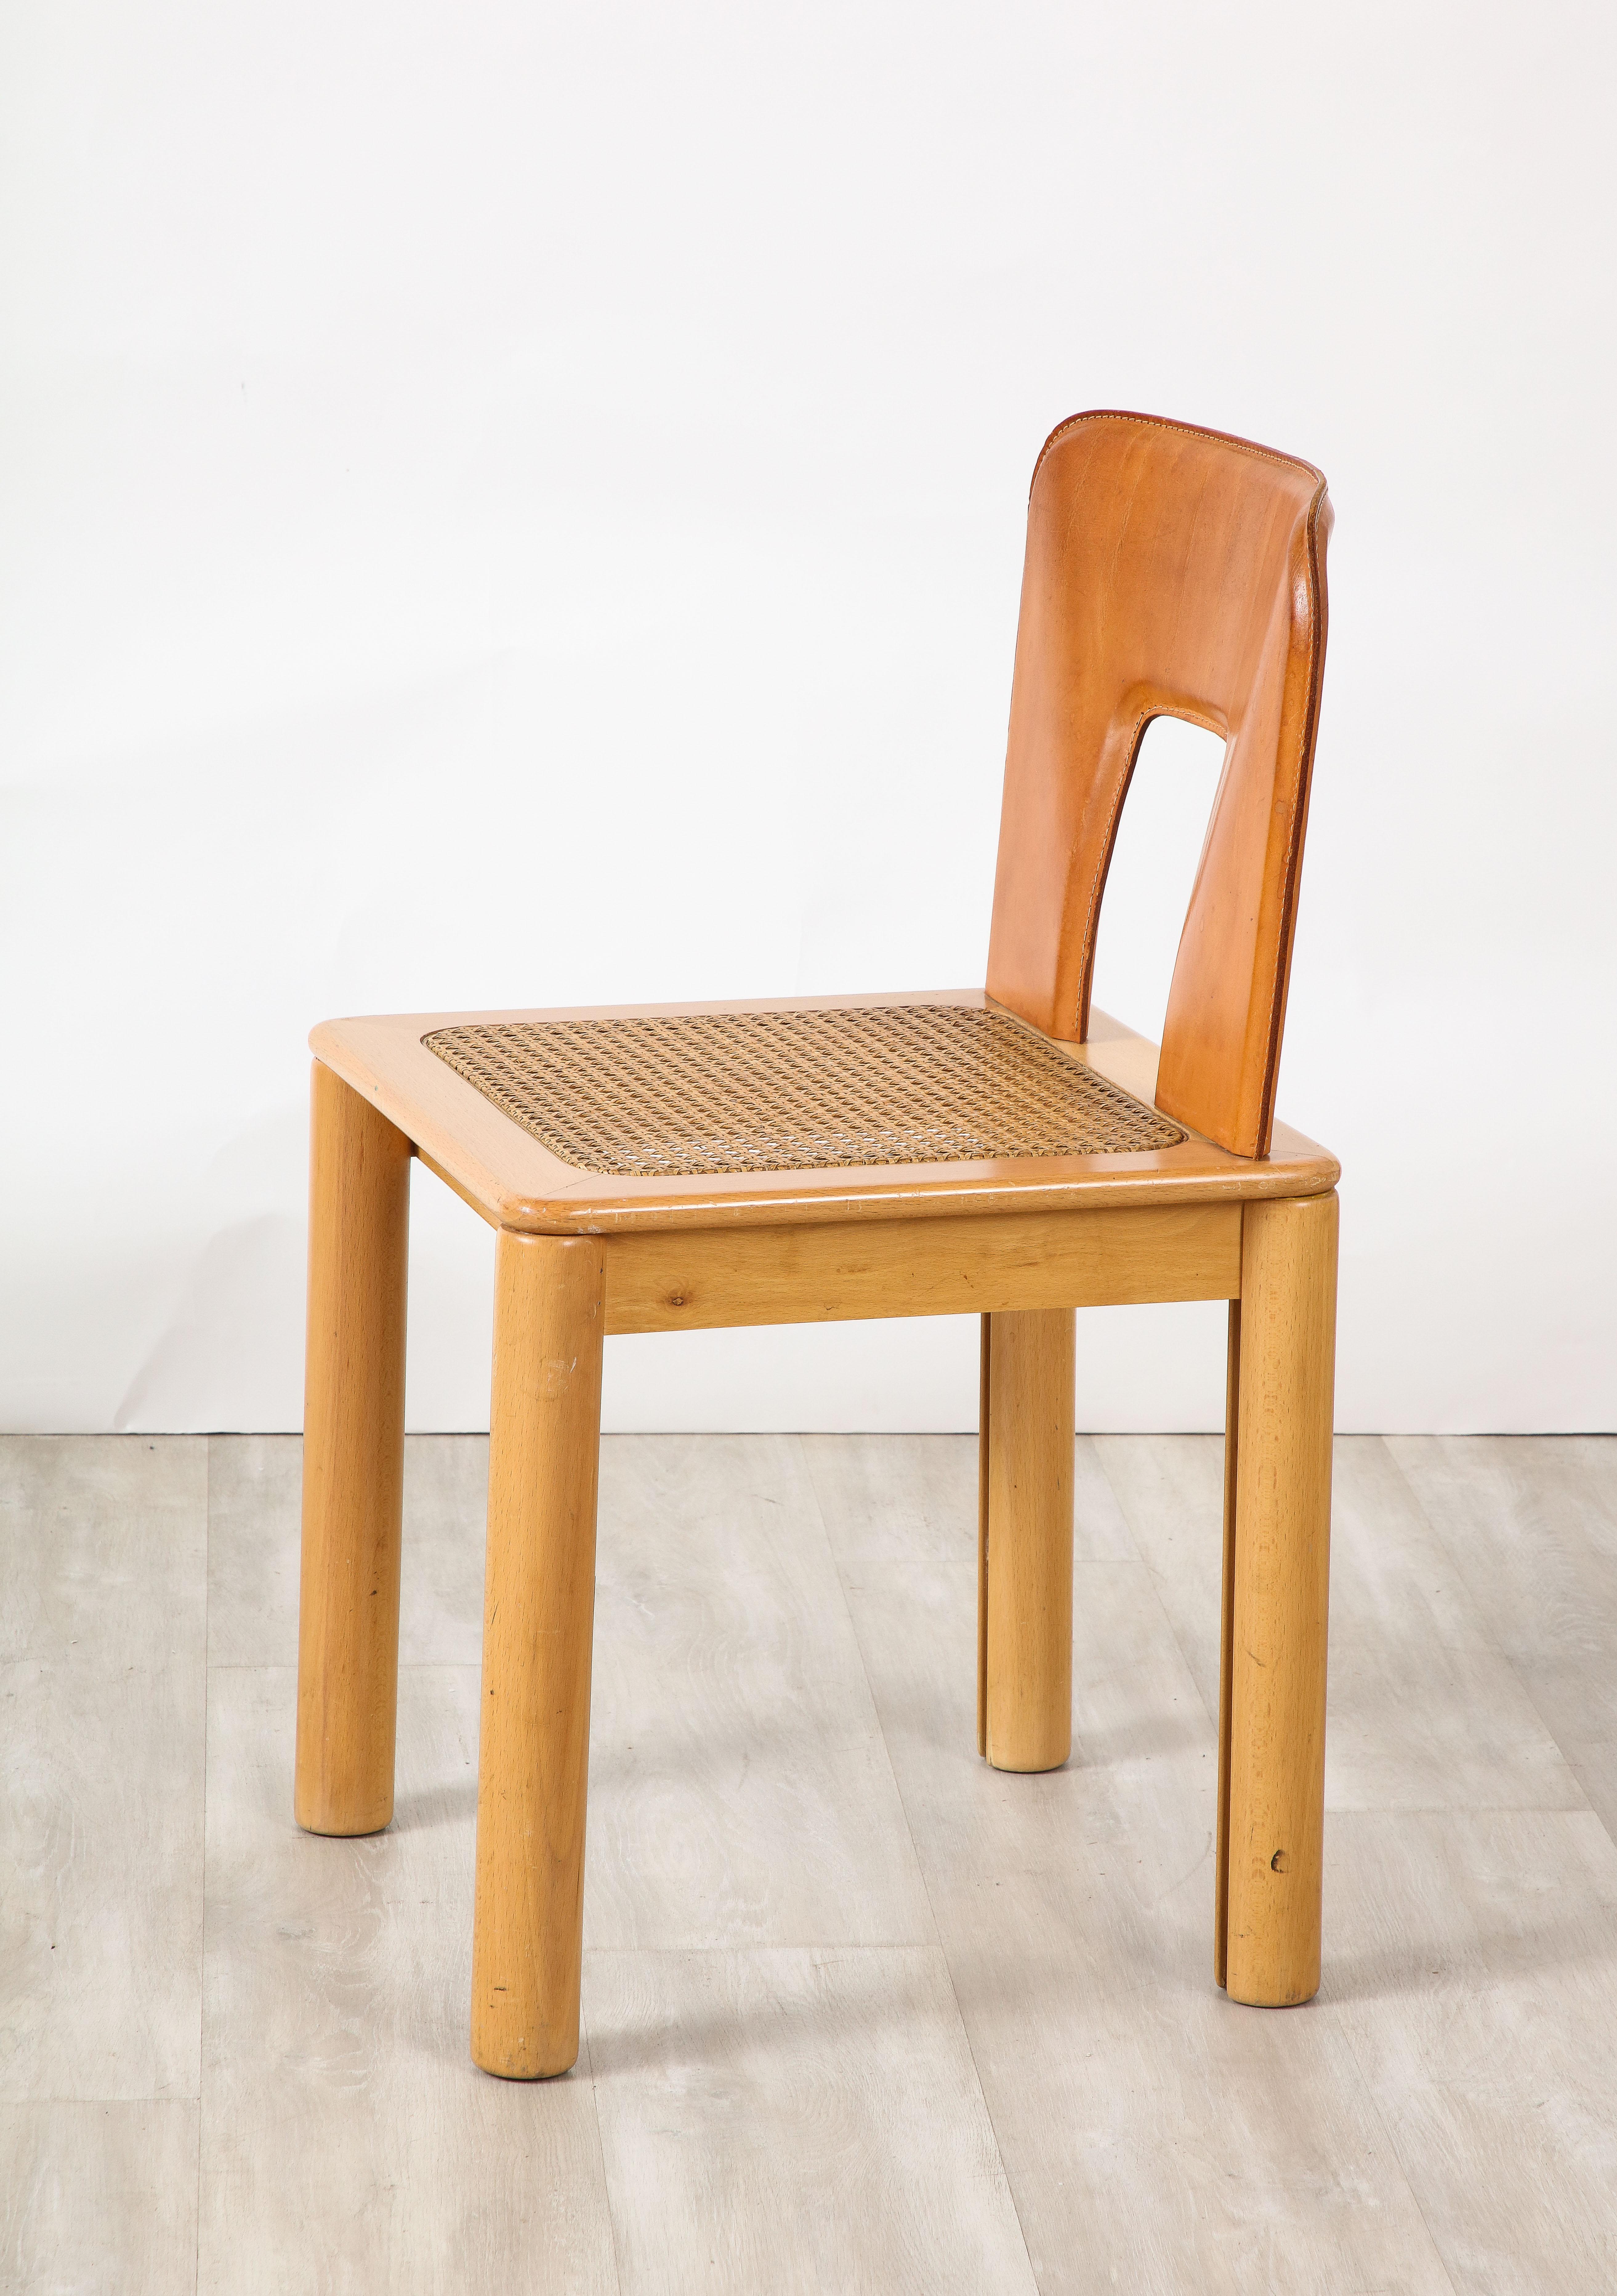 Italian 1970's Dining Chairs with Leather, Wood, Cane Seats, Italy, circa 1970 For Sale 11